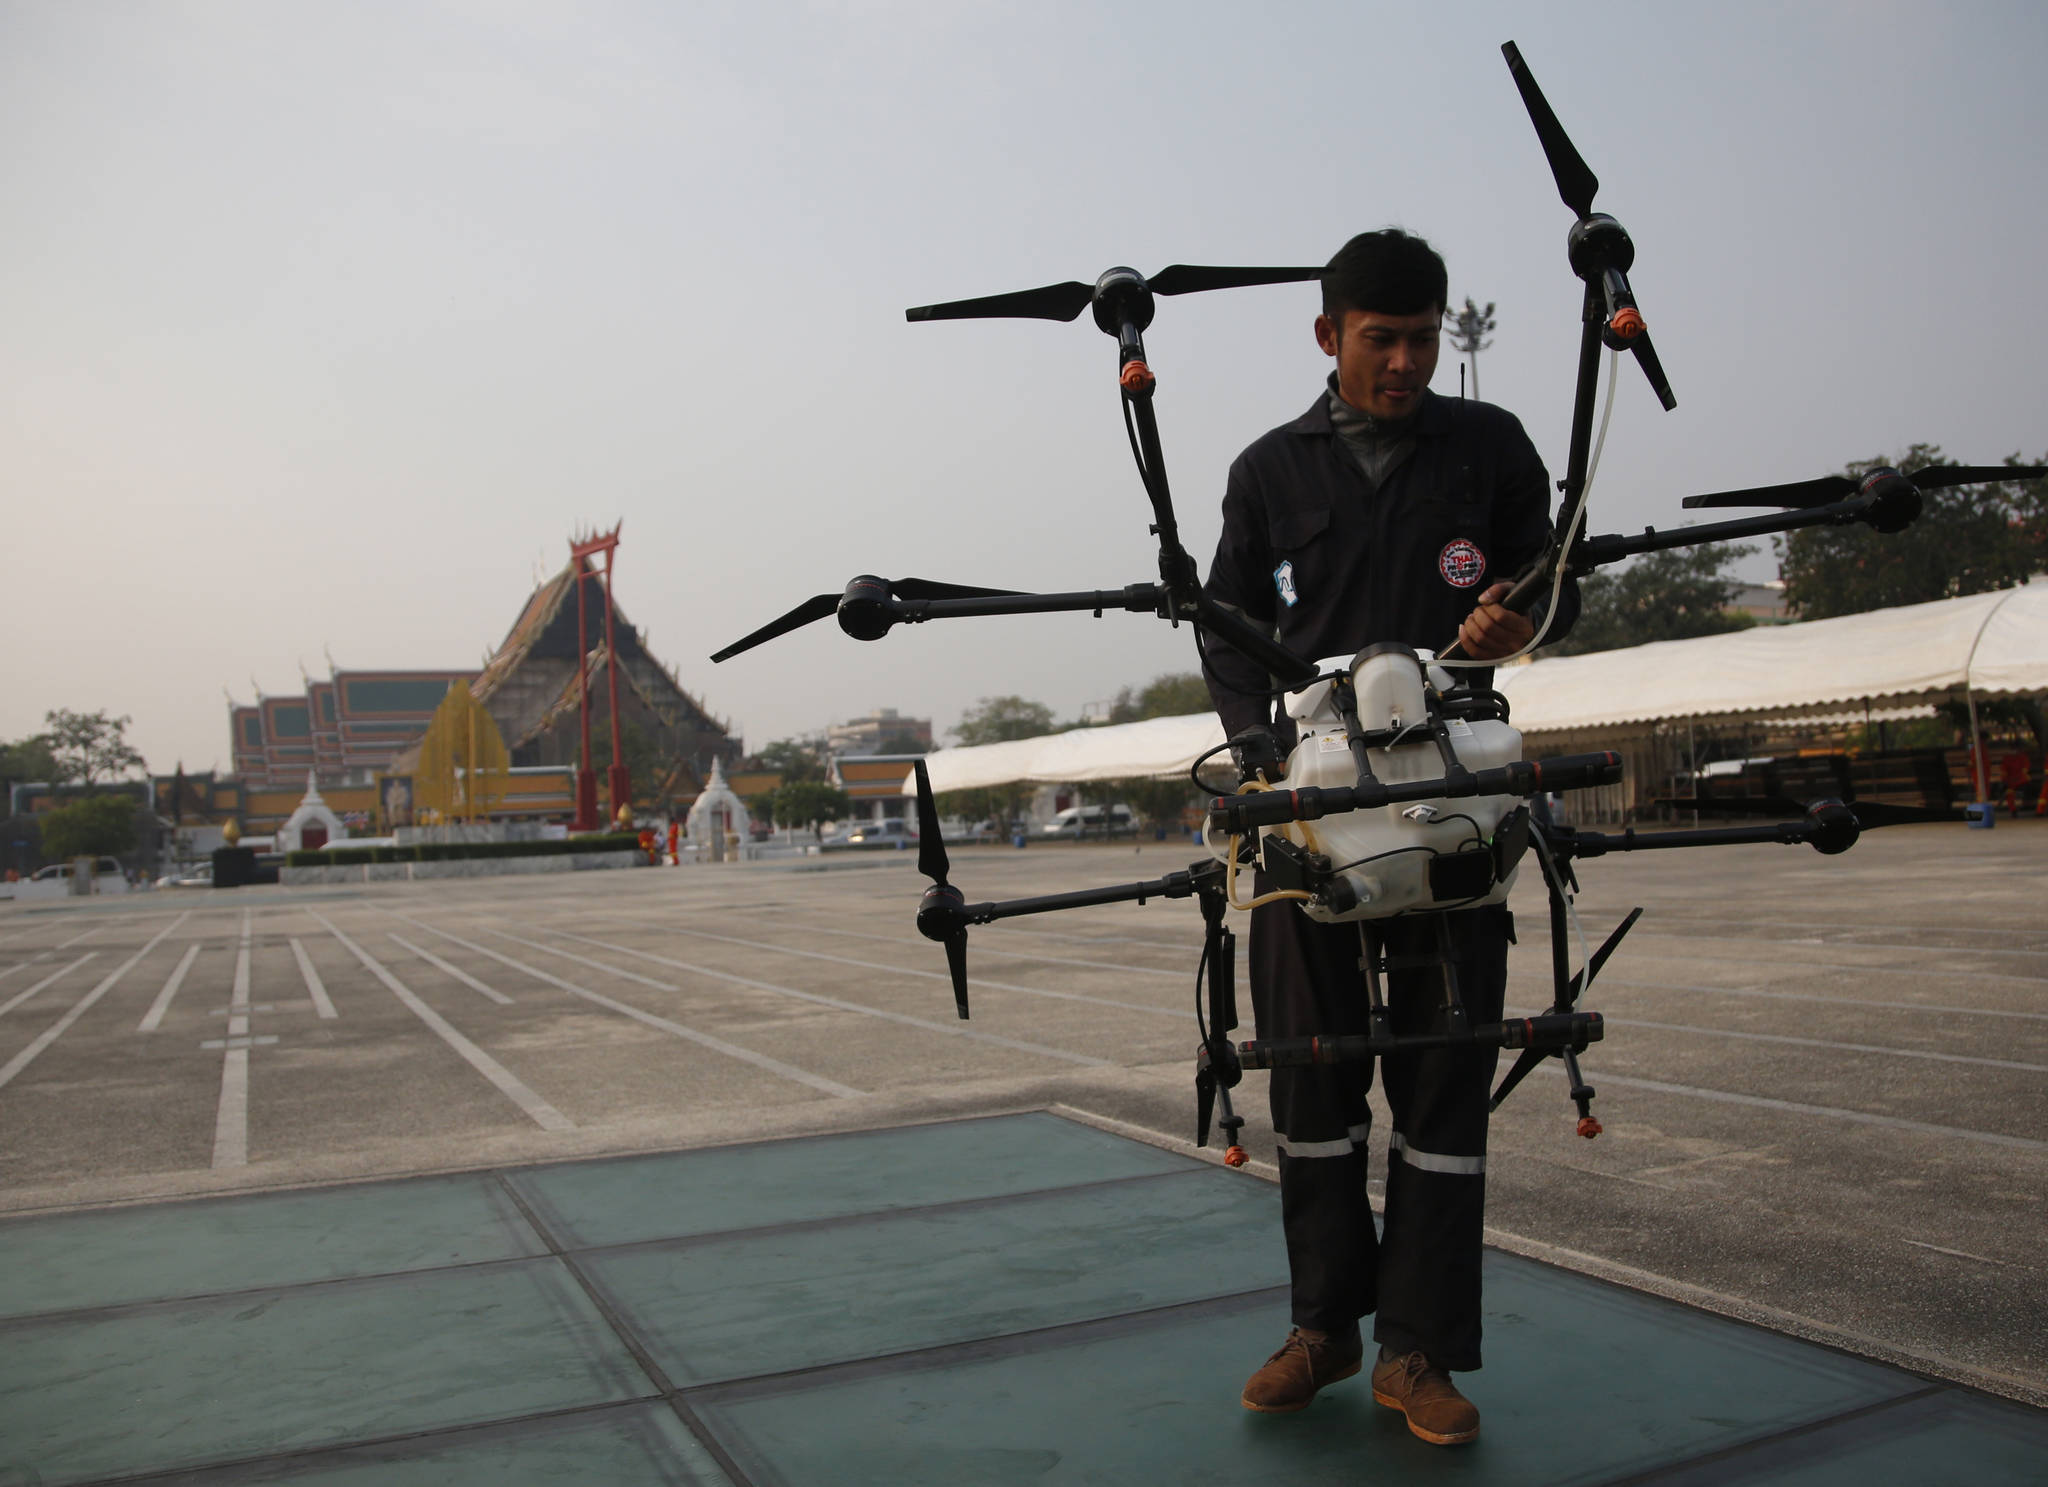 Bangkok flies drones as PM warns of costs in pollution fight